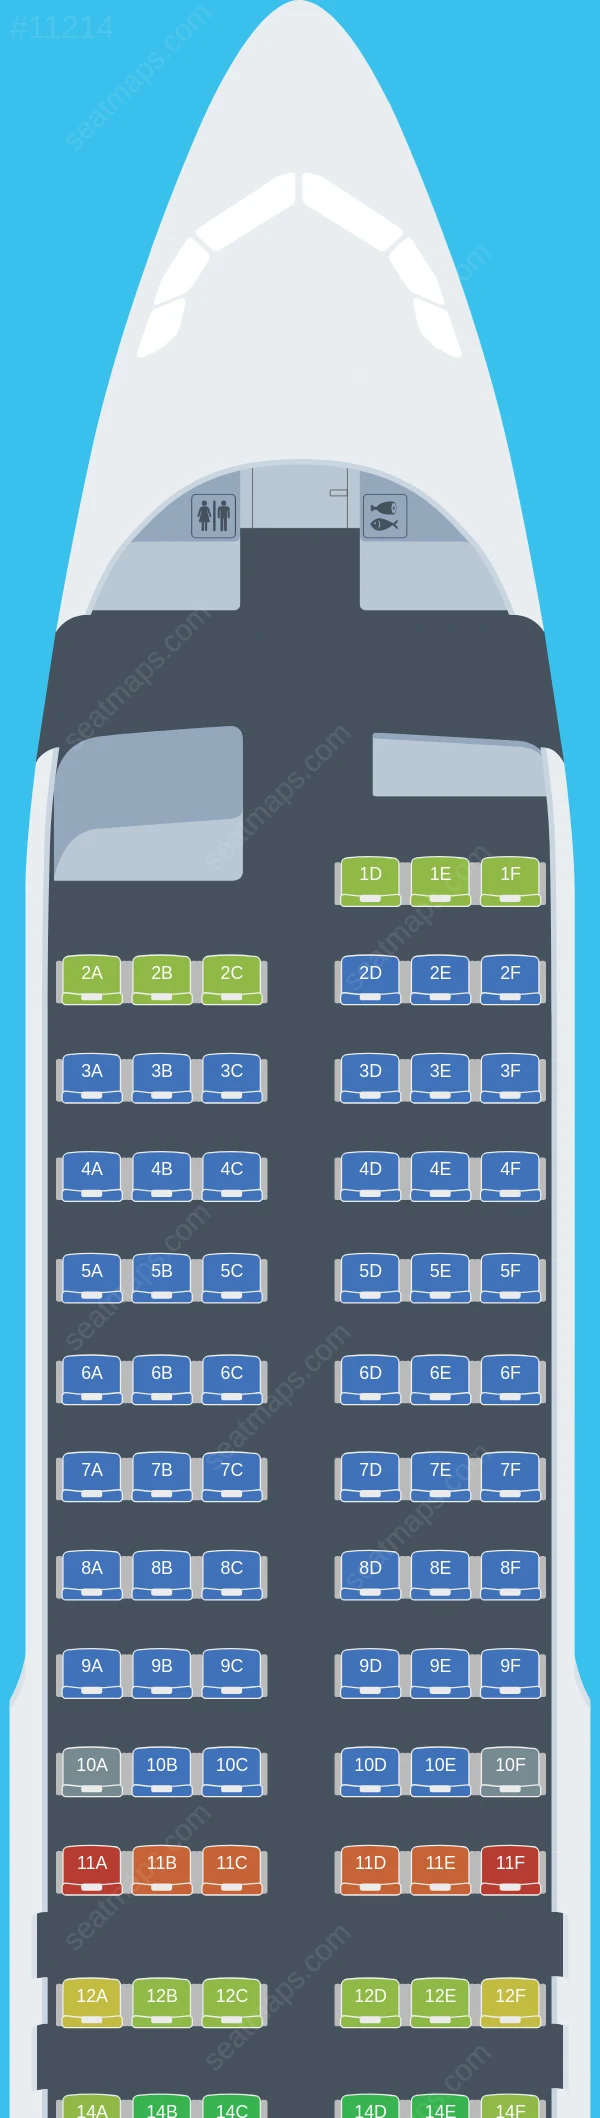 Atlantic Airways Airbus A320-200 V.1 seatmap preview